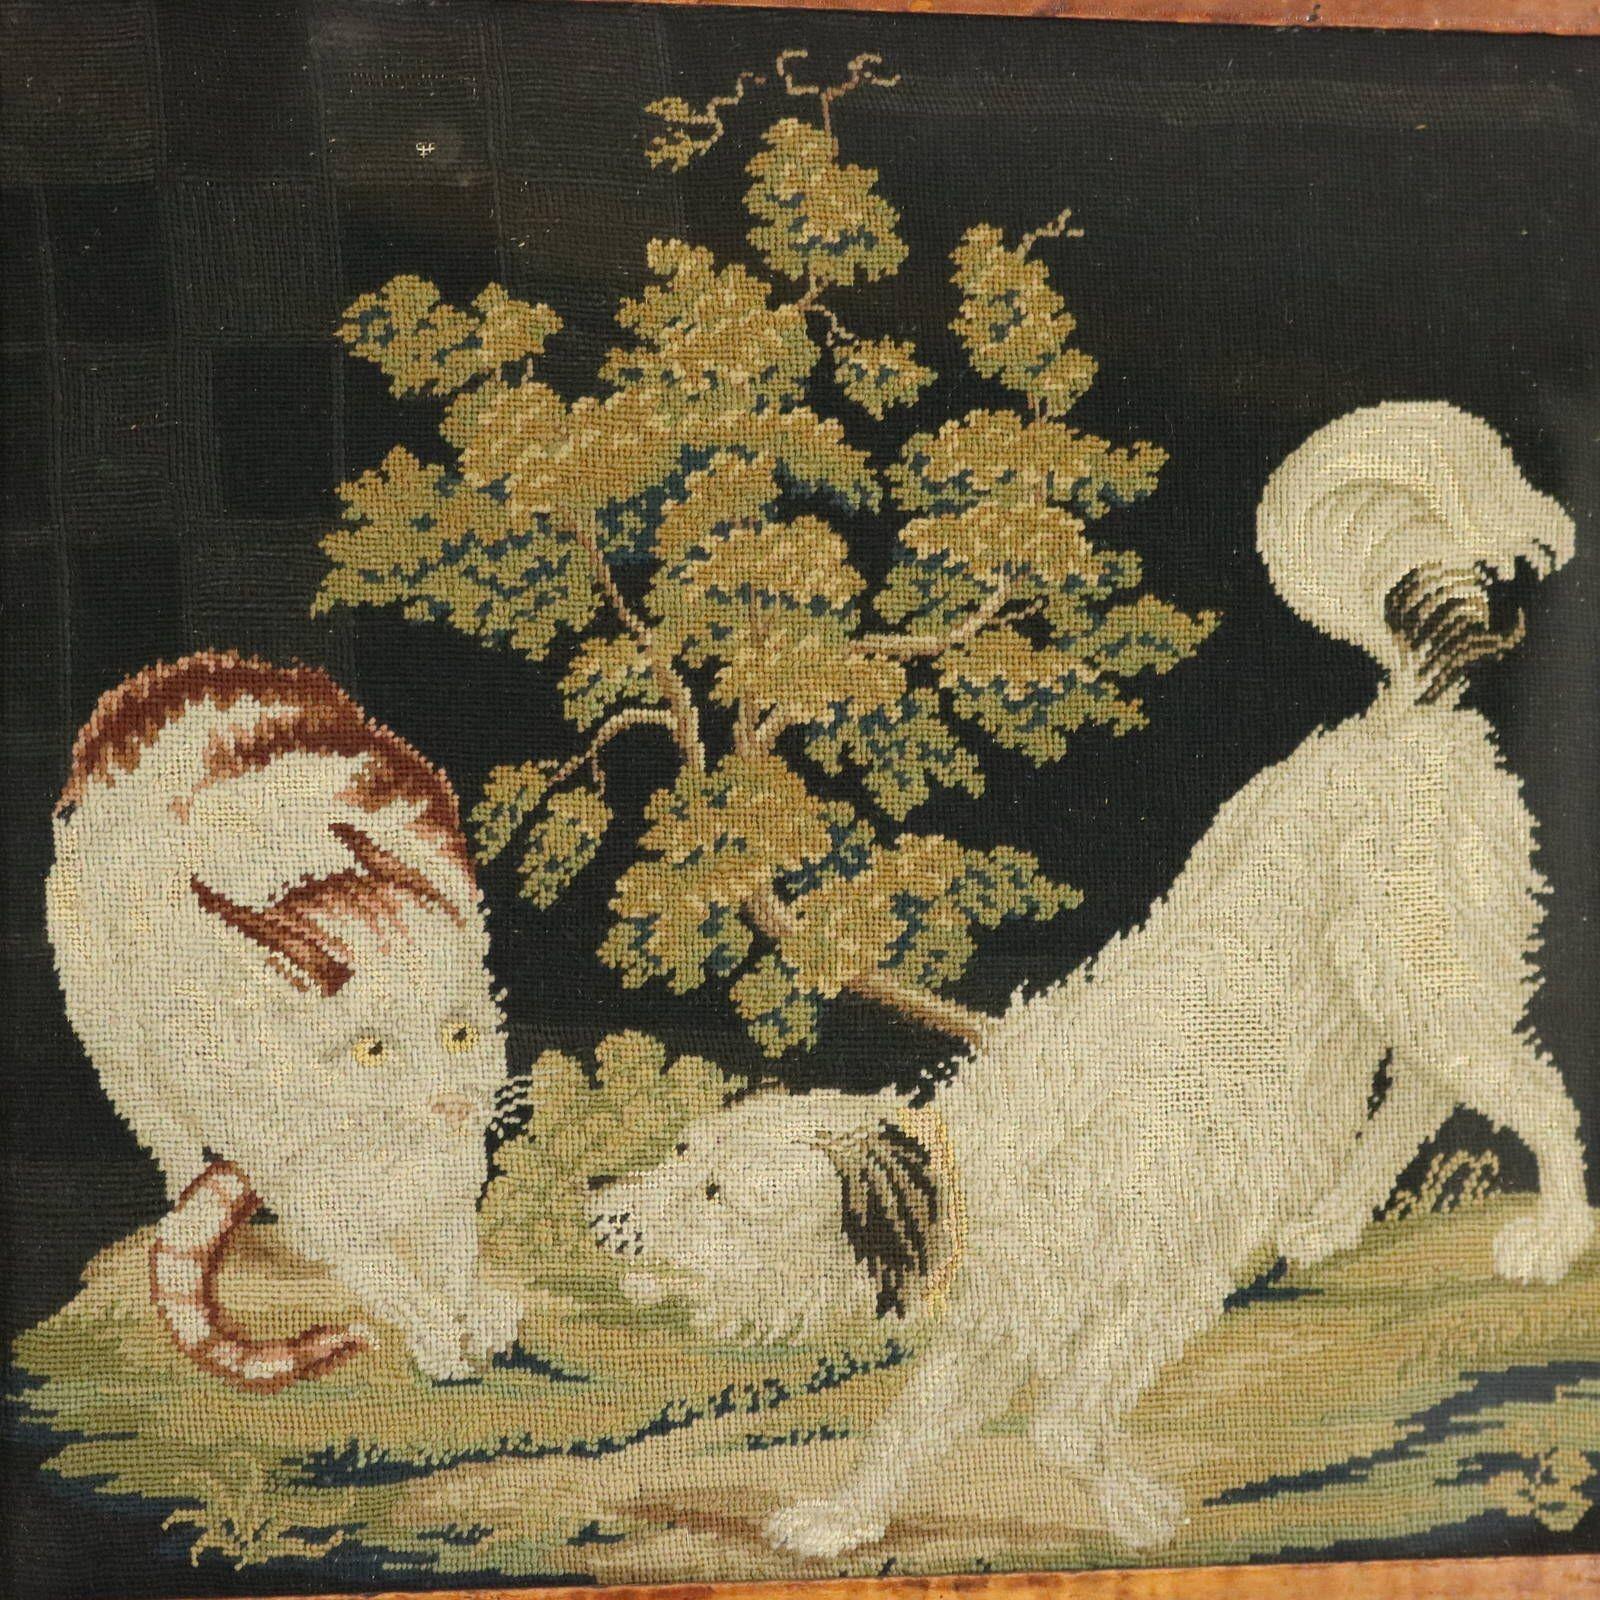 Georgian Woolwork Embroidery of Dog & Cat. The piece is worked in tent stitch, using silk and wool thread. Colours black, green, white, silver and brown. Subject depicts an animated dog and cat in a country landscape, with a tree in the background.